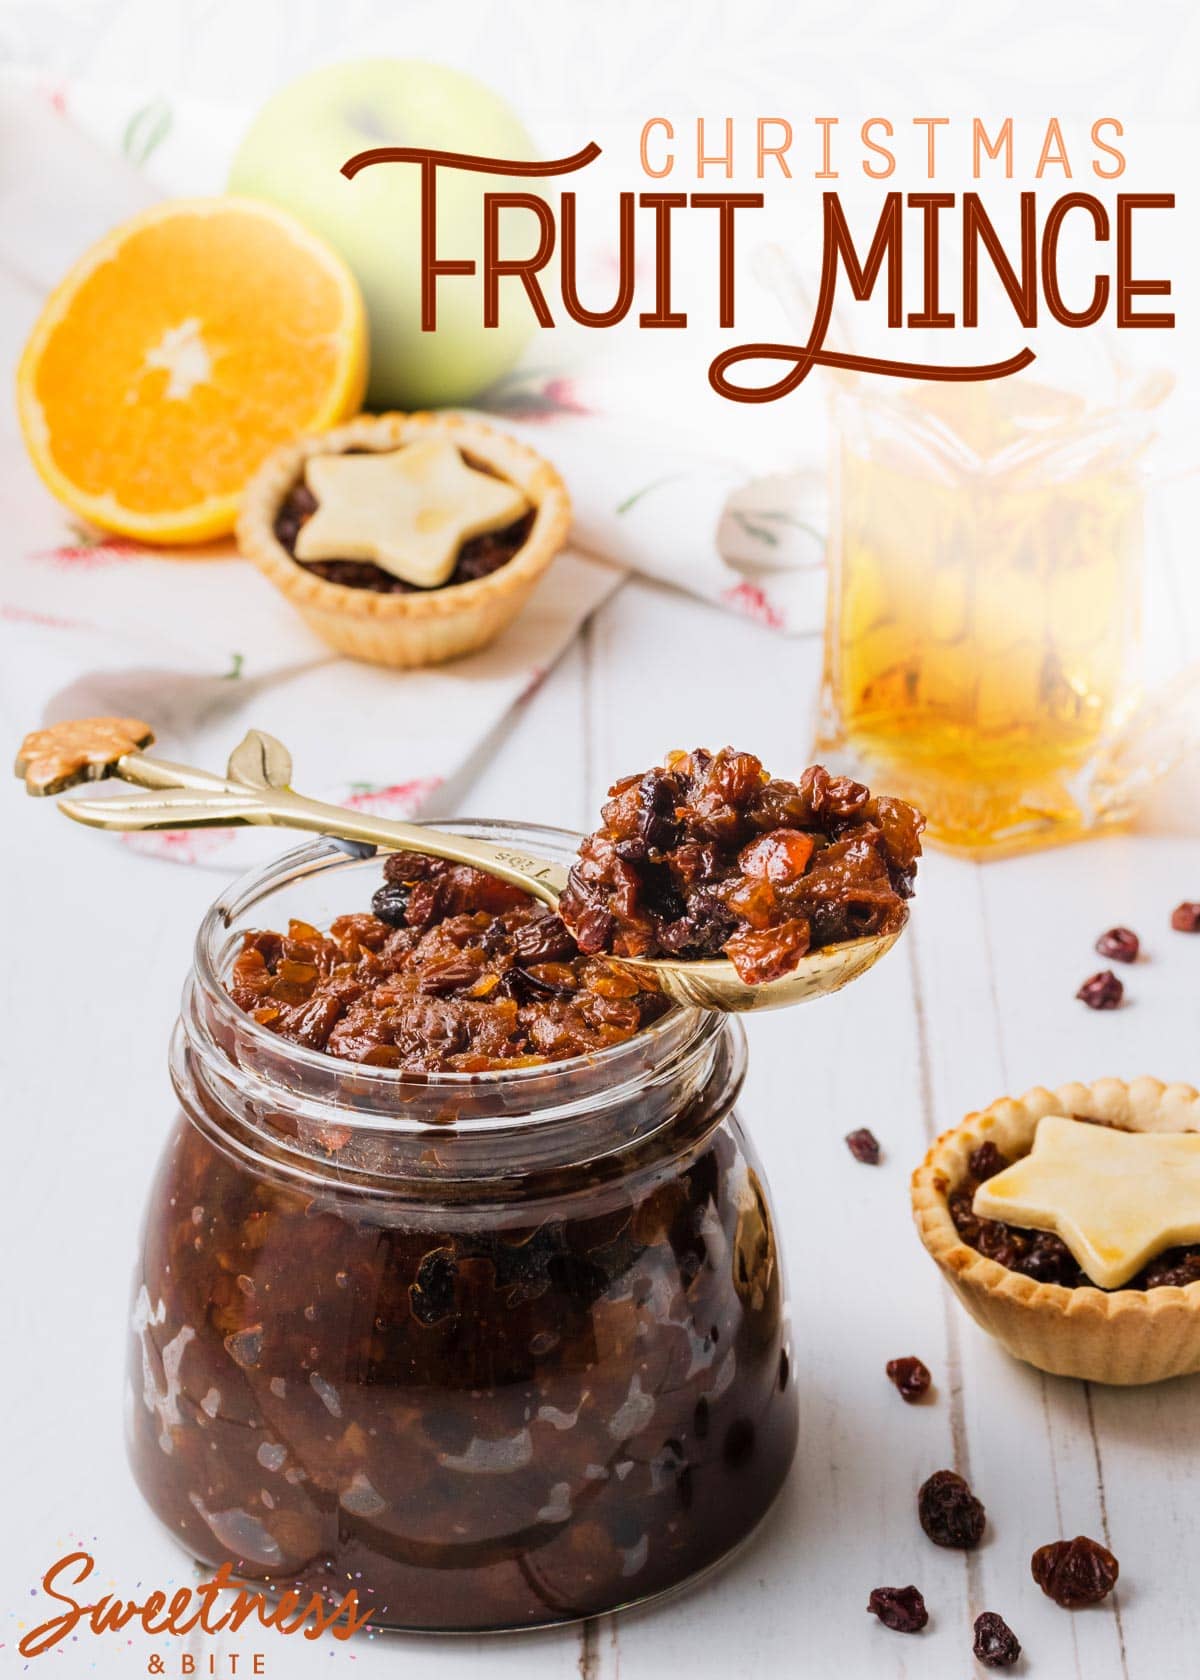 A large glass jar of fruit mince, on a white wooden background, with fruit mince pies, an apple, an orange and a glass jug of brandy, text overlay reads 